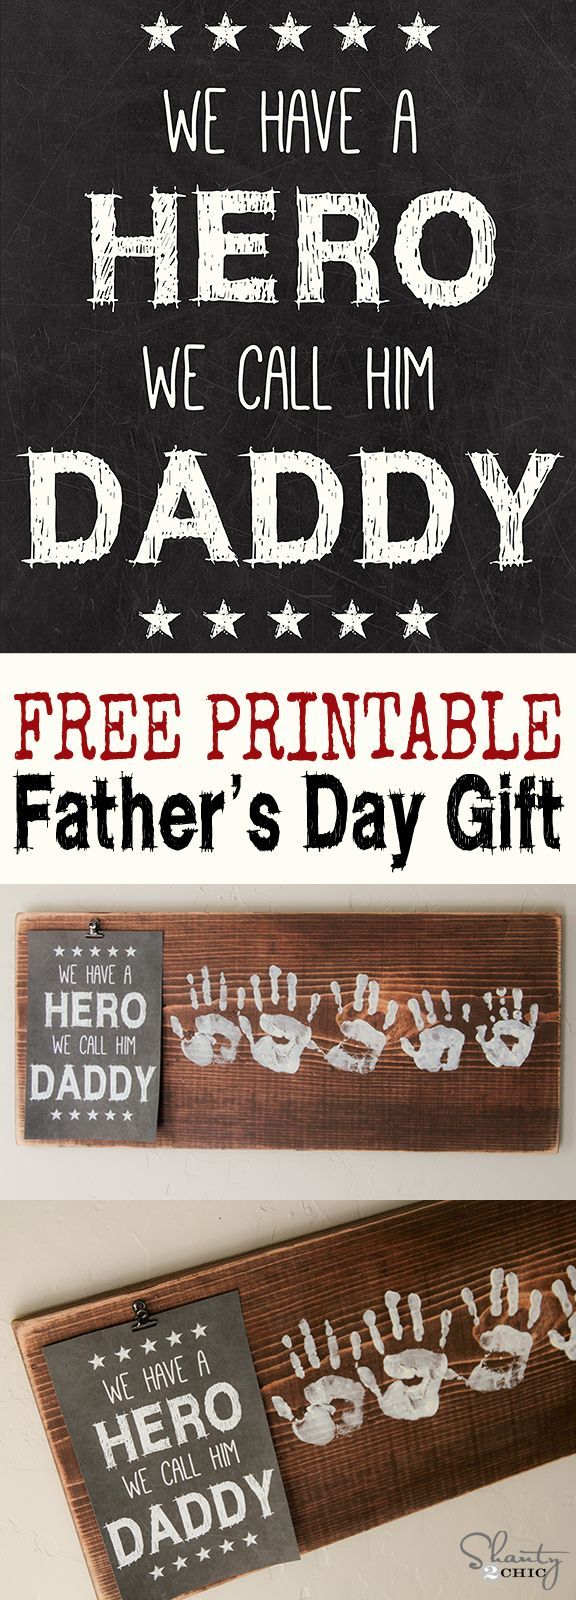 Father's Day gift idea with a FREE printable!  LOVE this!